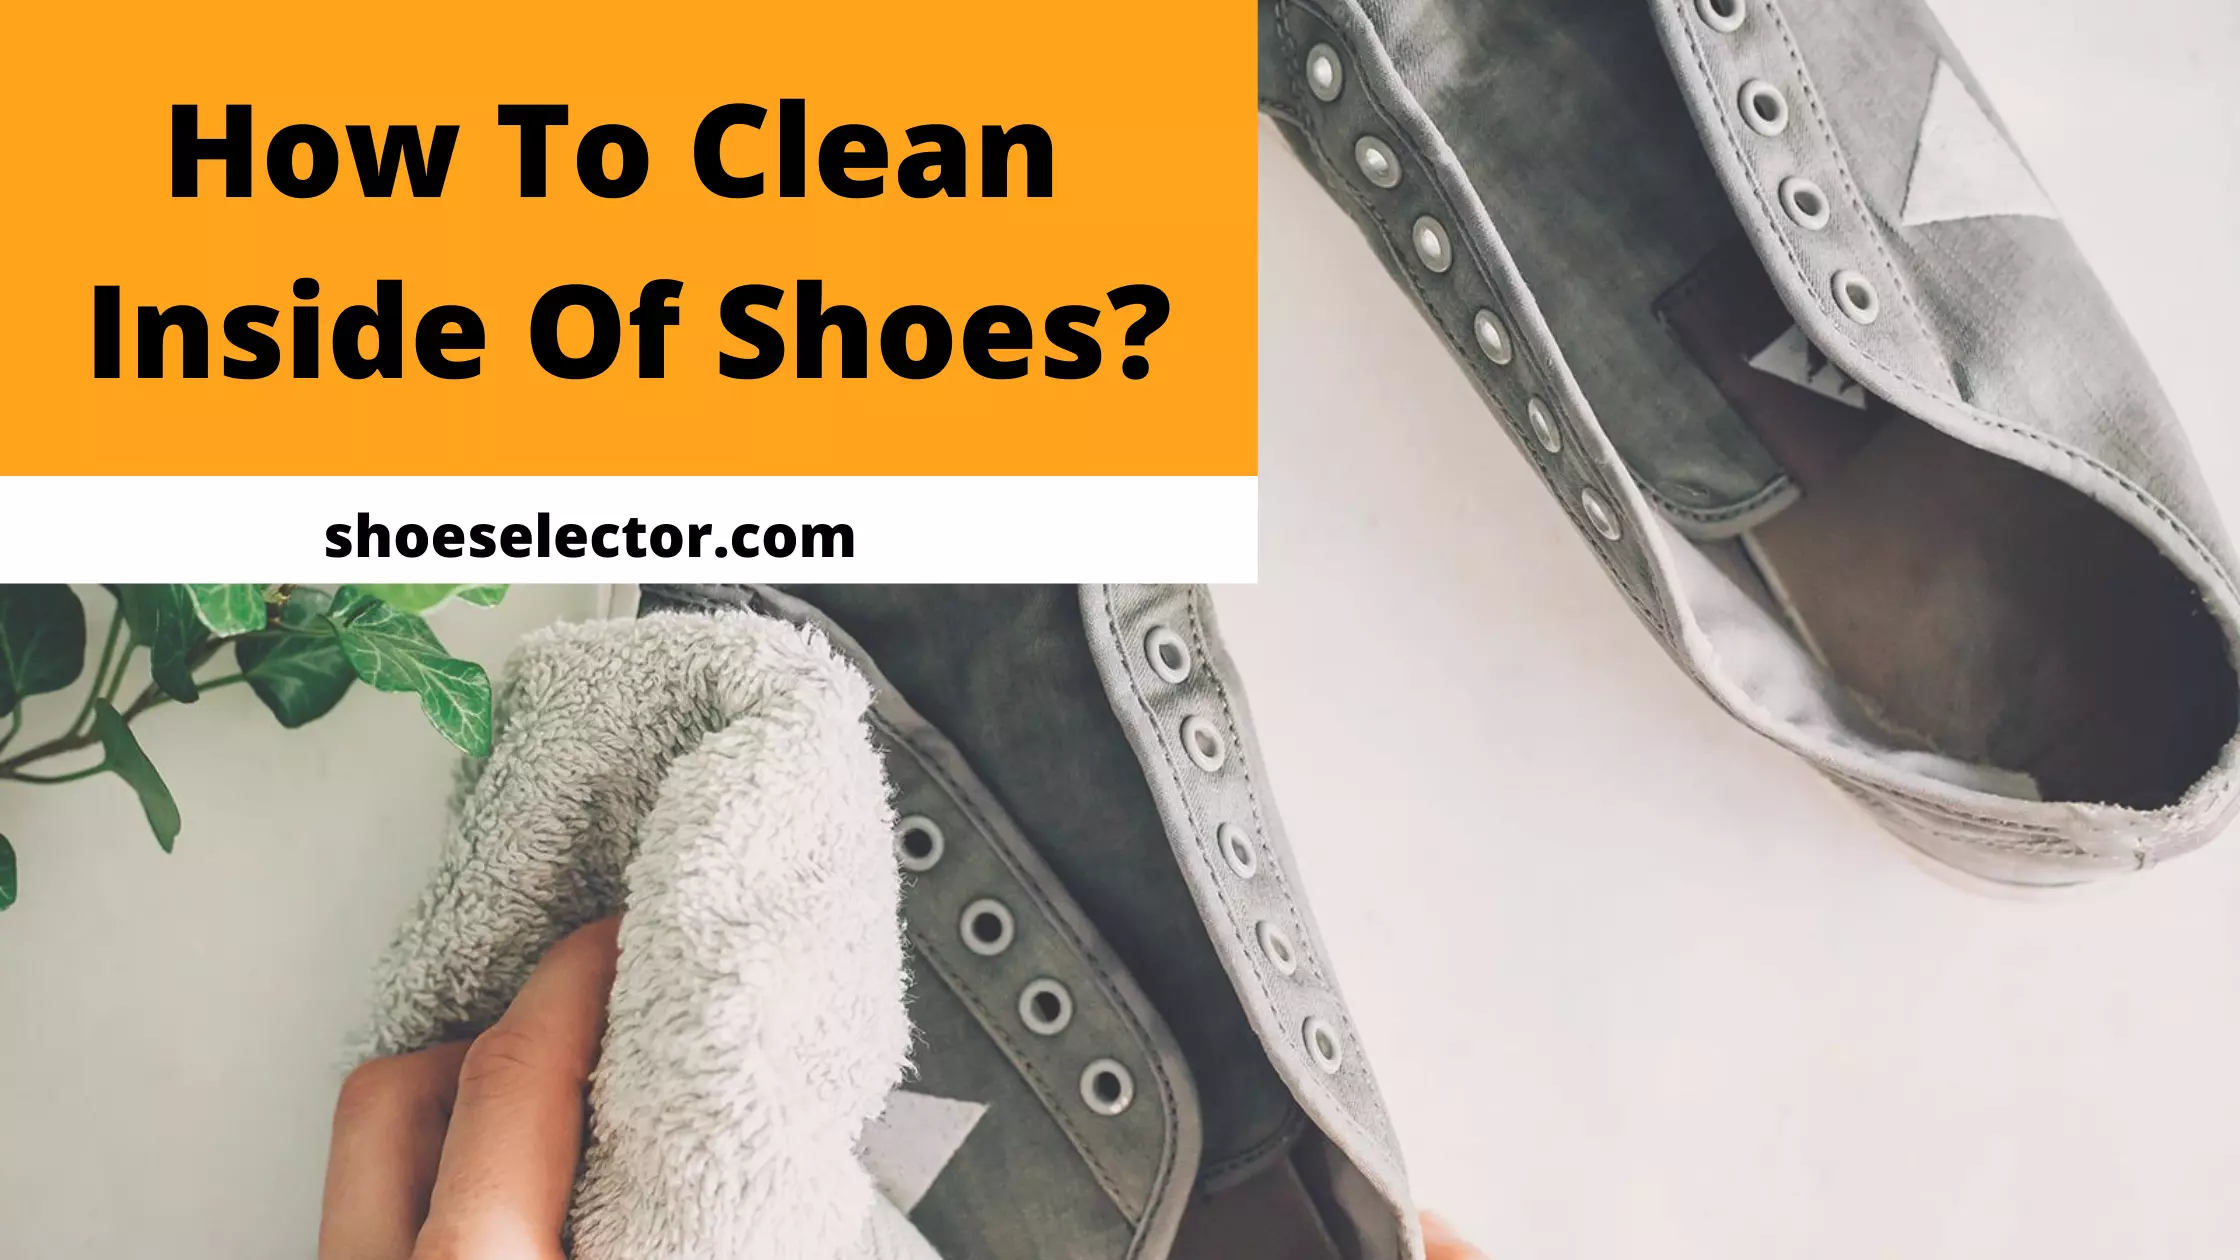 How To Clean Inside Of Shoes? 10 Easy Steps To Try